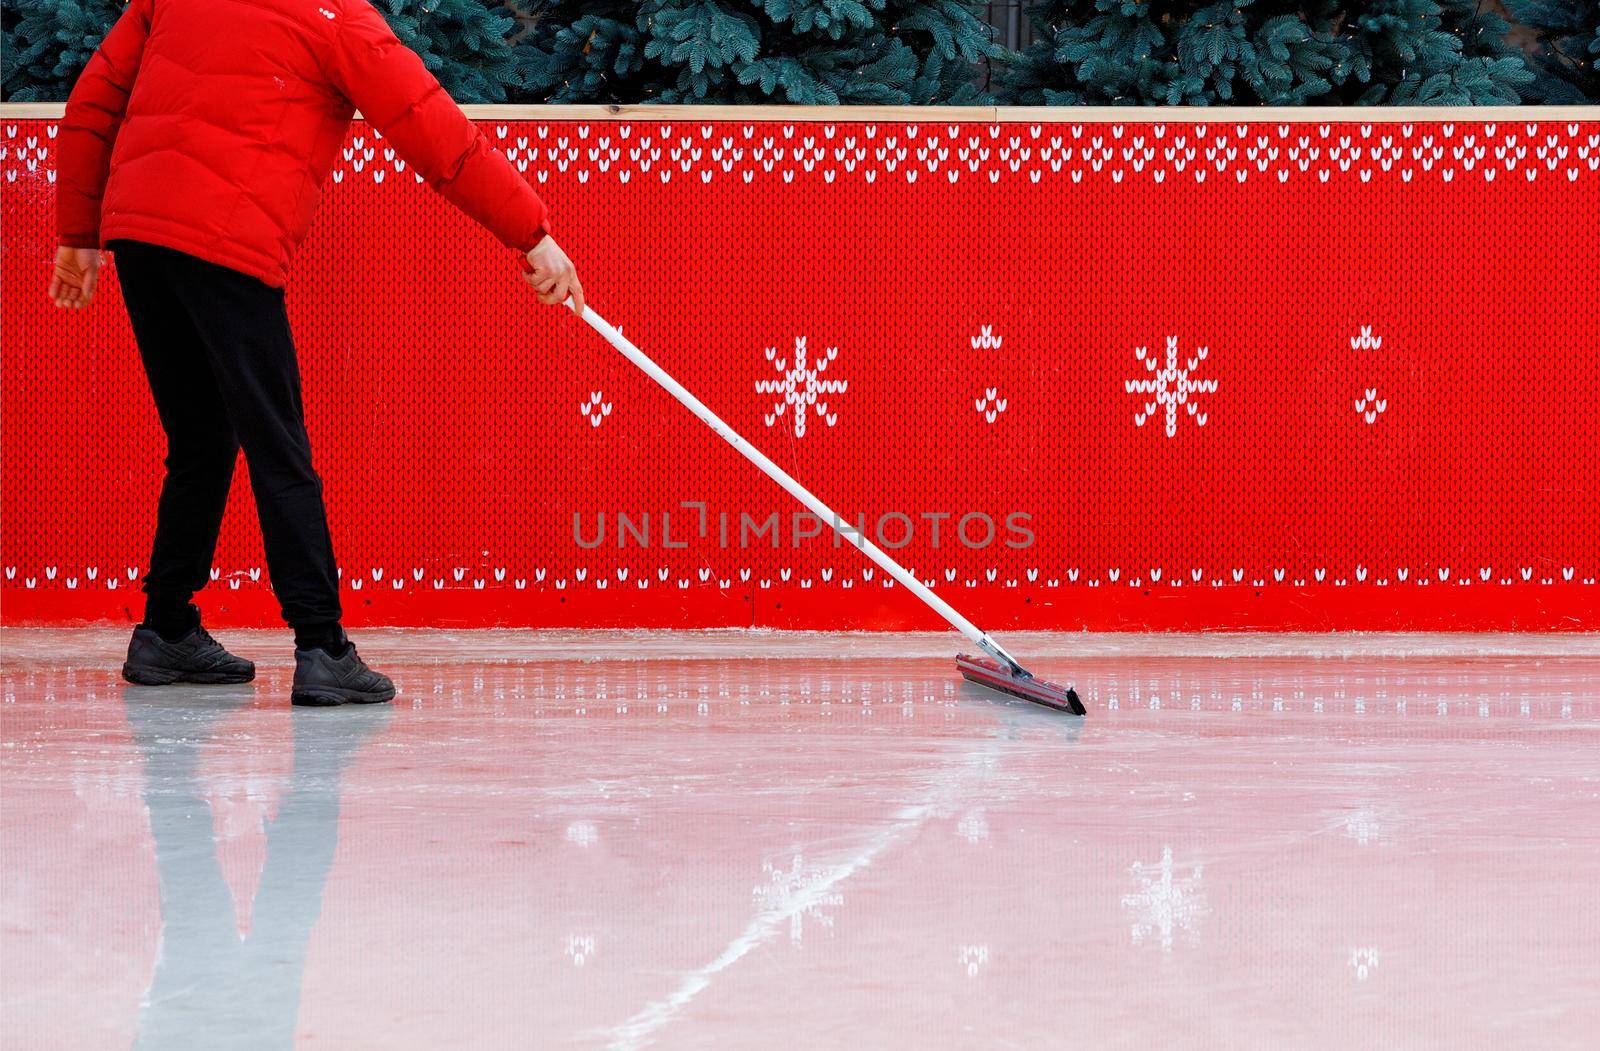 An ice stadium worker, surrounded by a red fence and wearing a red jacket, scrubbing the ice surface with a rubberized mop to remove small chips. Copy space.